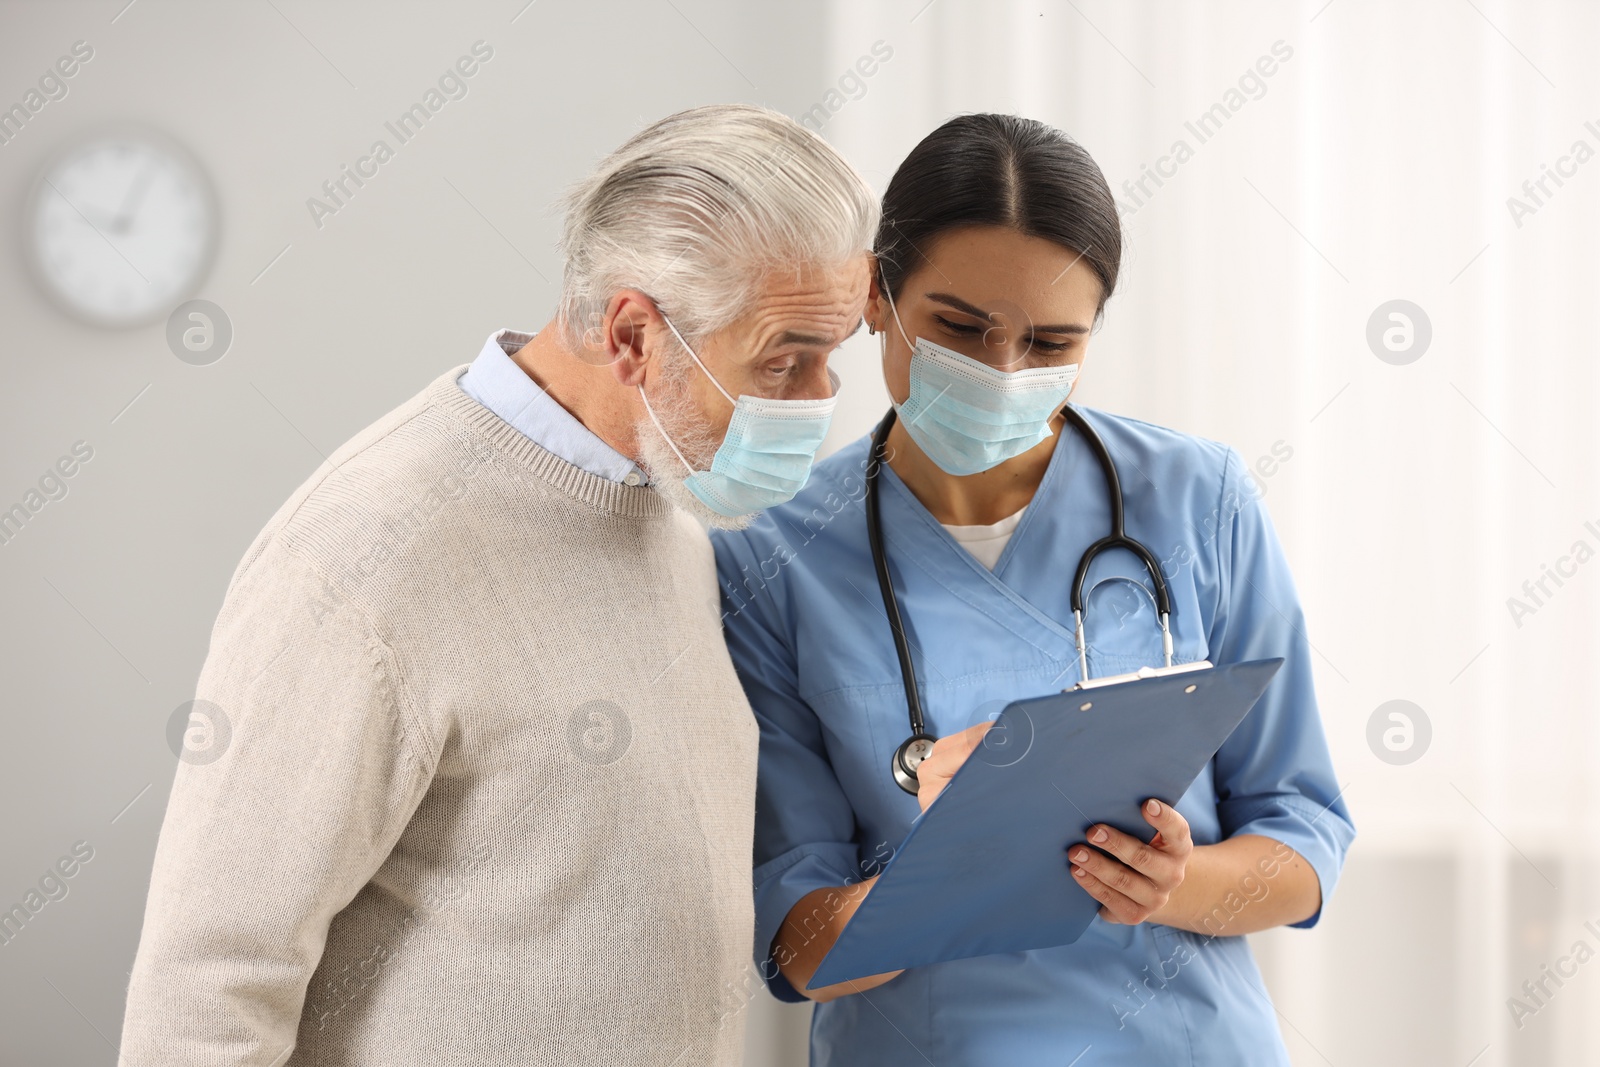 Photo of Nurse with clipboard and elderly patient in hospital